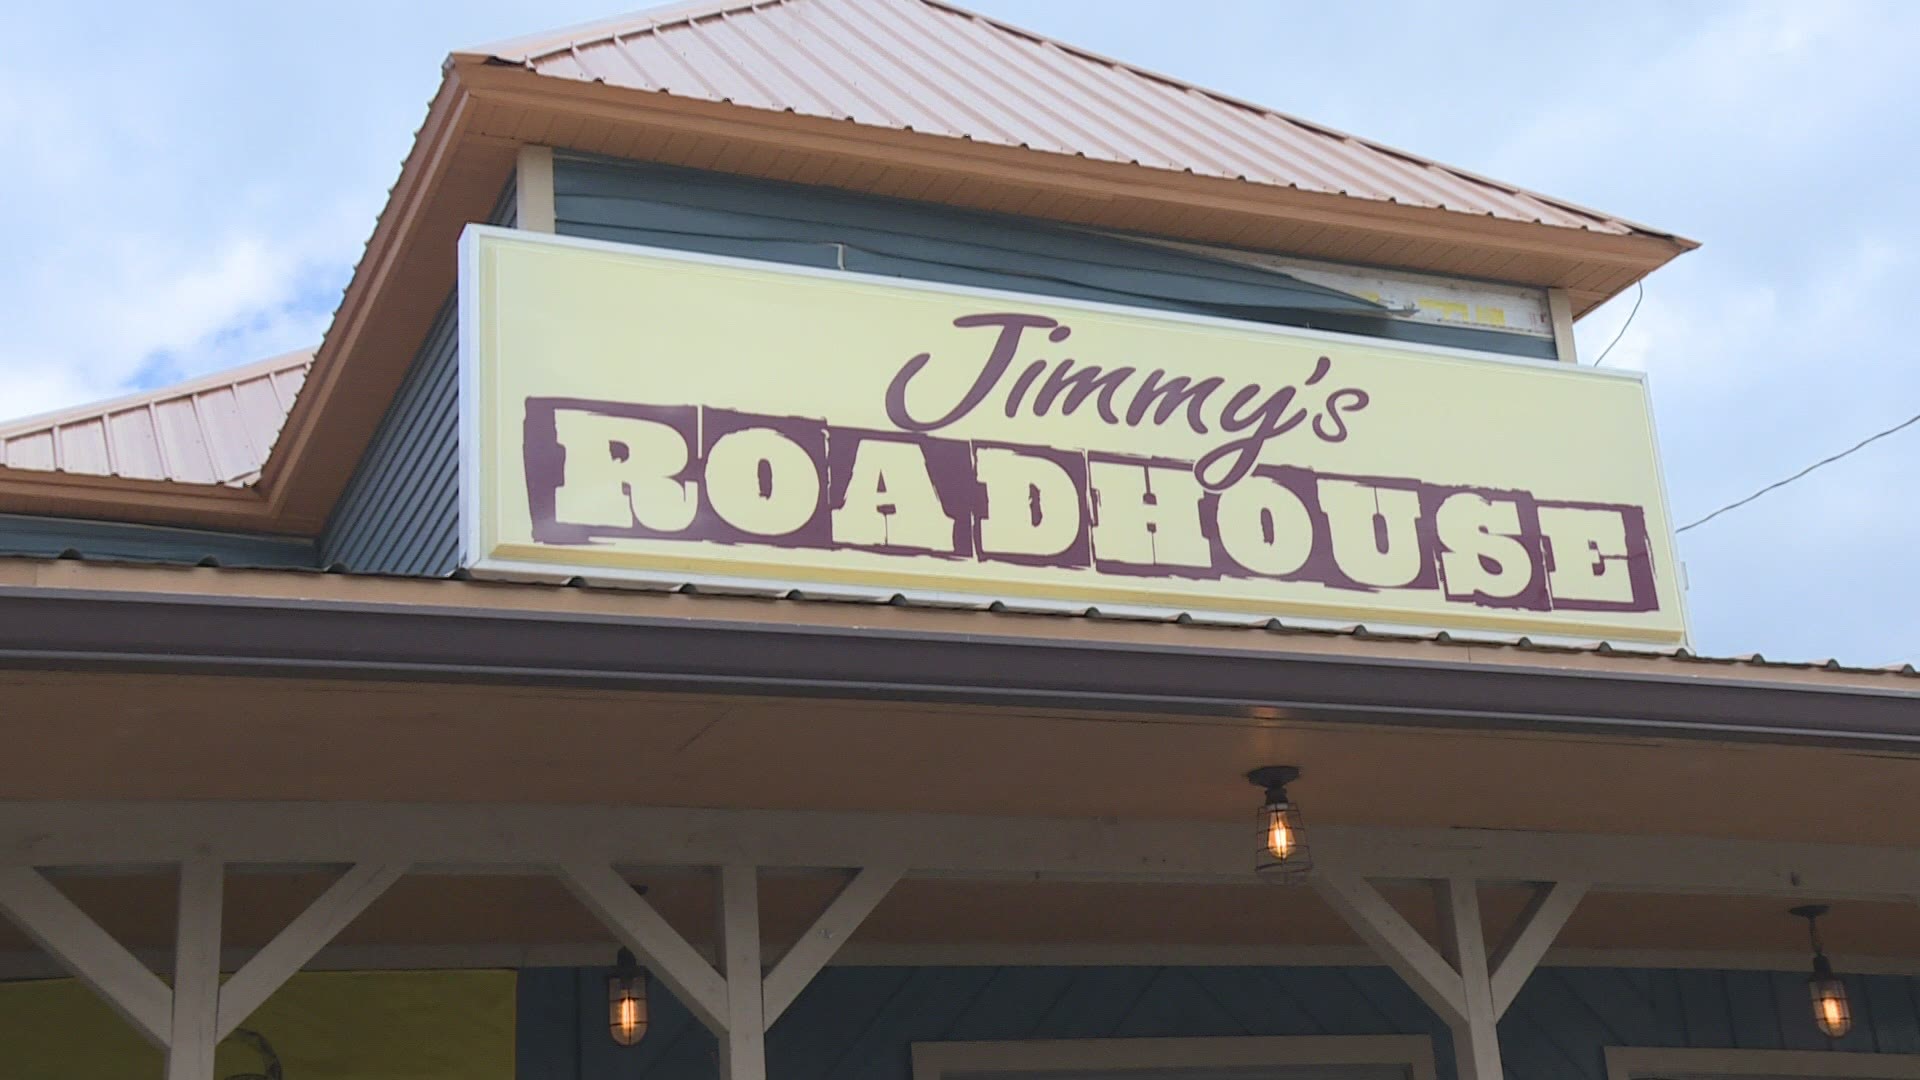 Jimmy’s Roadhouse is staying open for dine-in customers in defiance of a state health department order; other Michigan restaurants are doing likewise